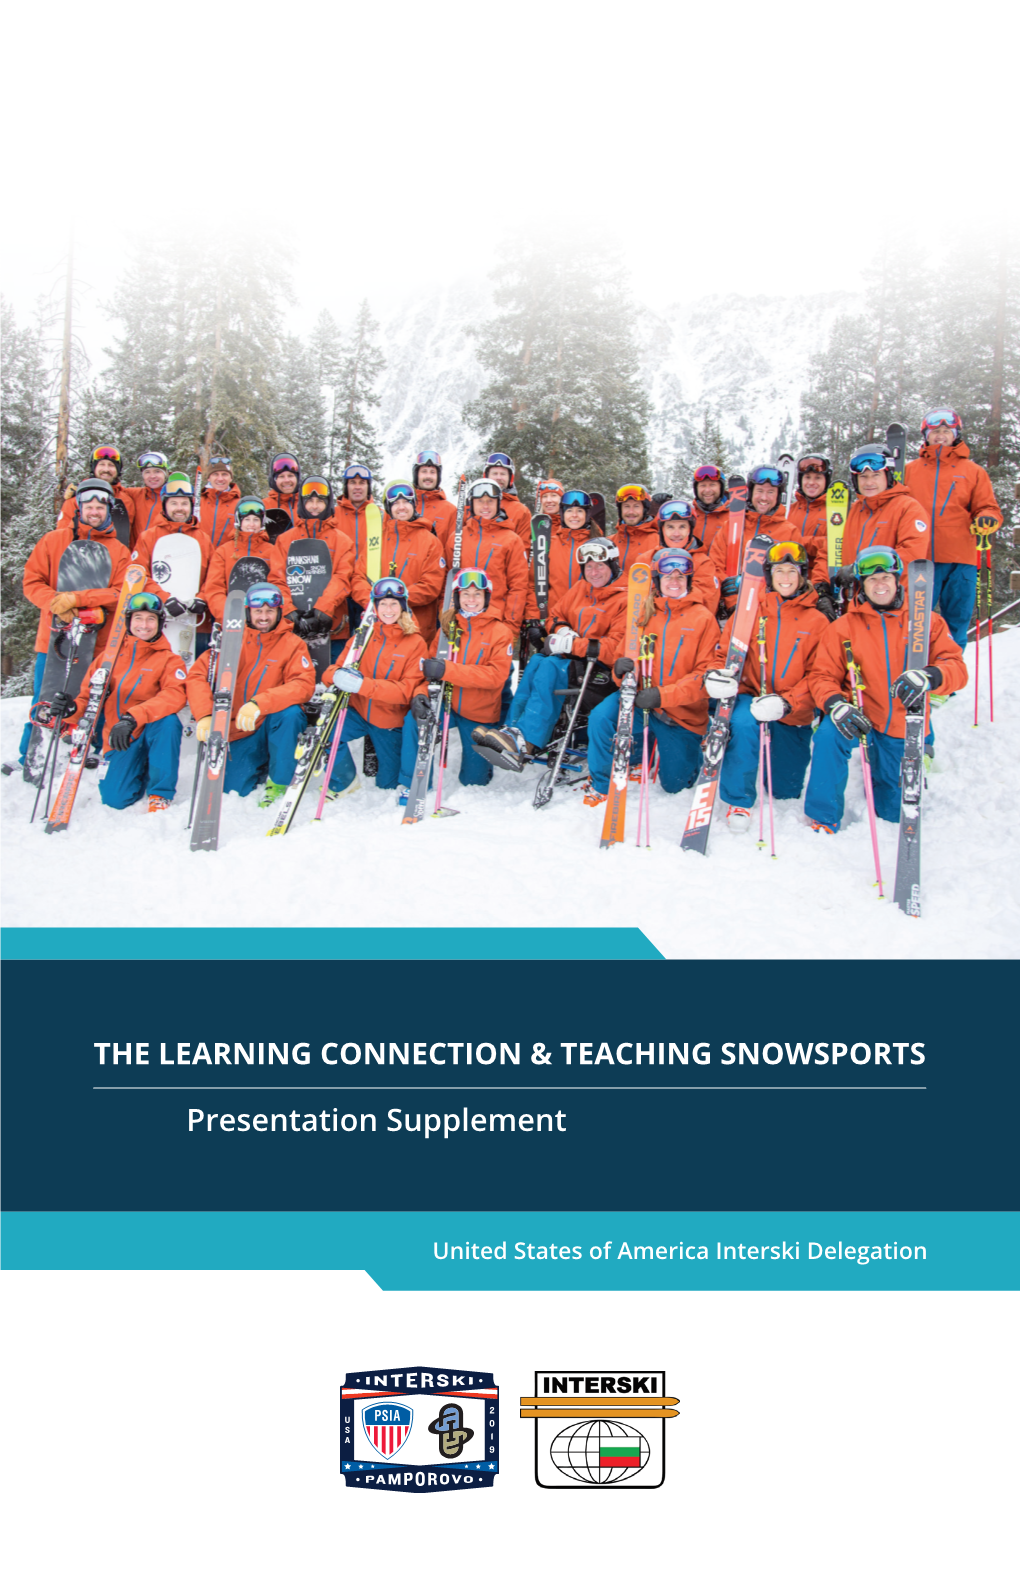 The Learning Connection & Teaching Snowsports Presentation Supplement